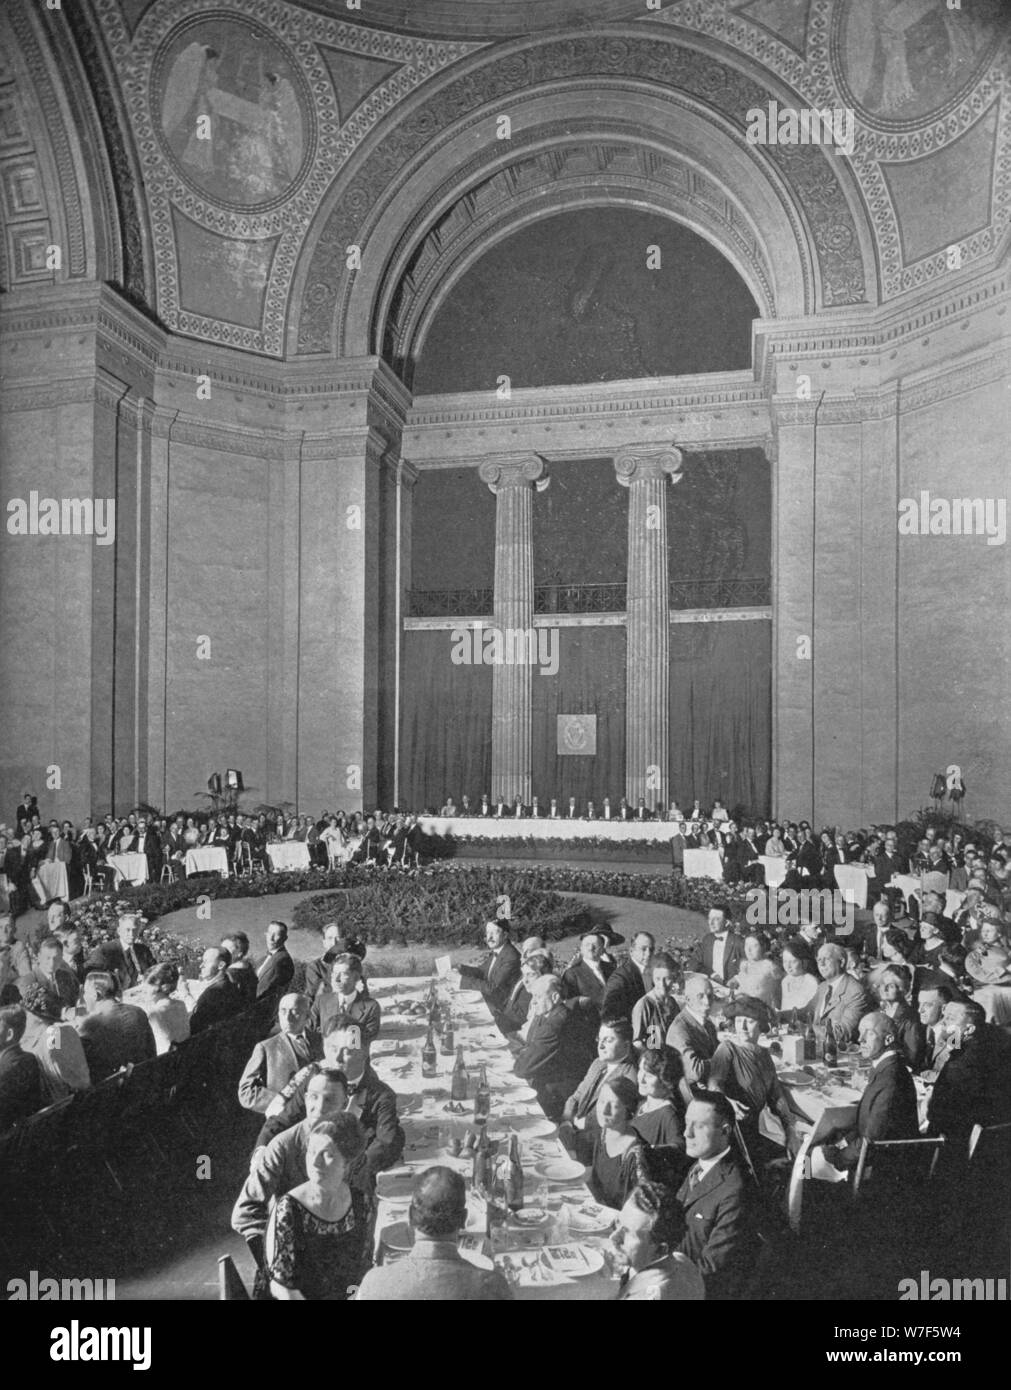 American Institute of Architects banquet, Old Fine Arts Building, Chicago, Illinois, 9 June 1922. Artist: Unknown. Stock Photo